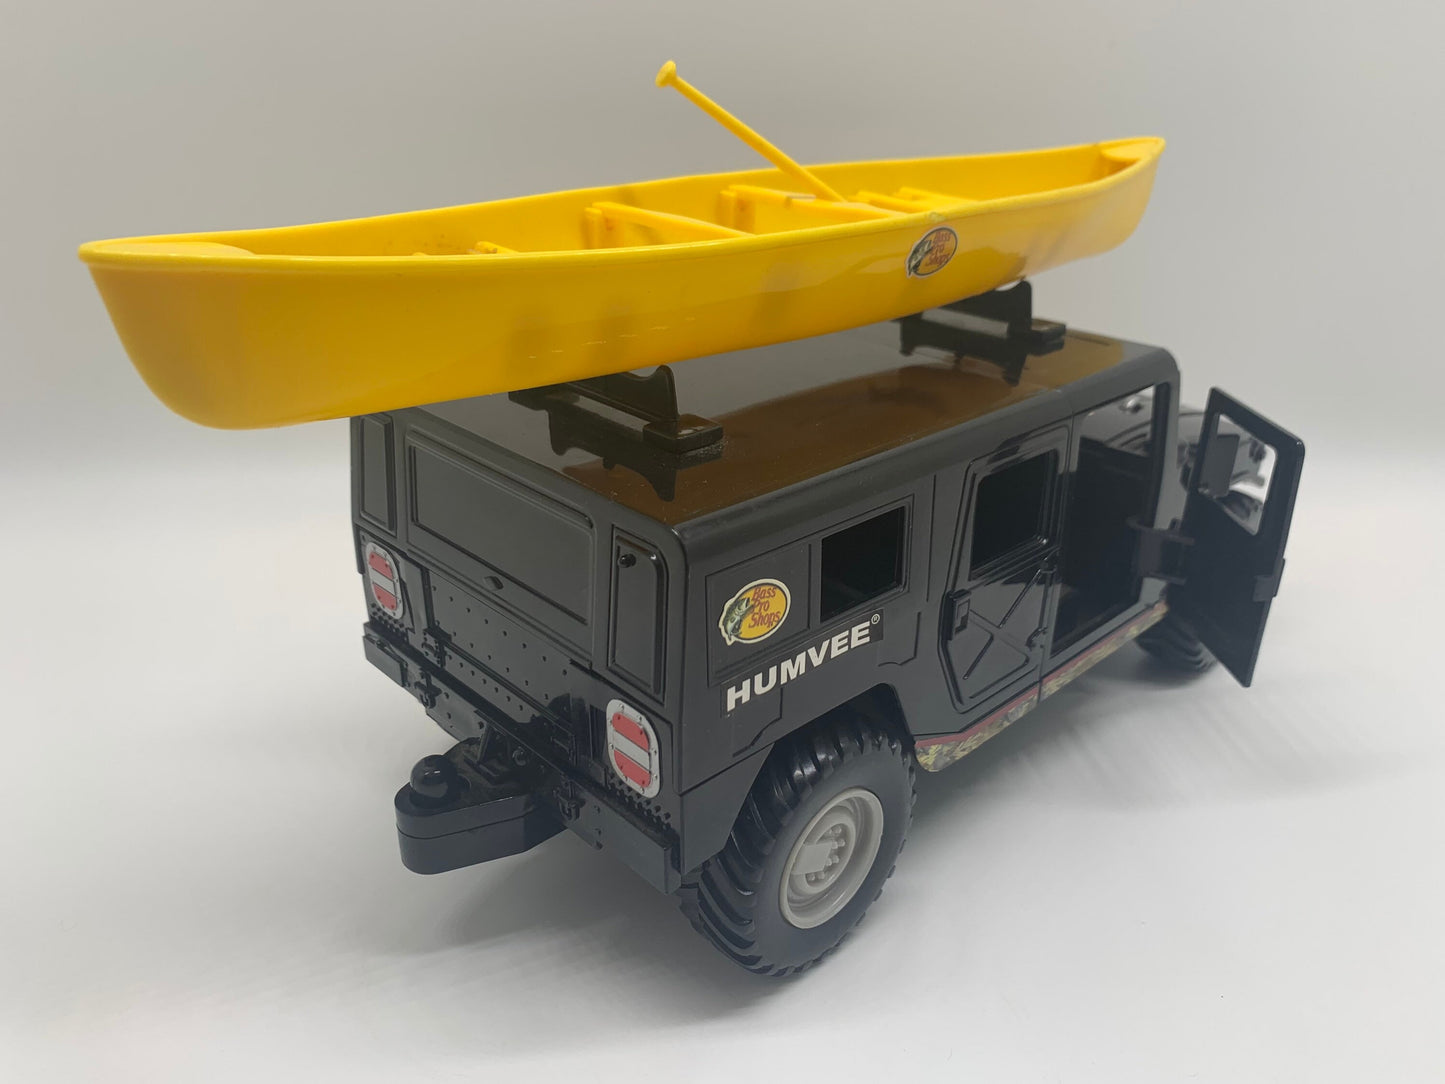 Bass Pro Shops Humvee and Canoe Collectible 124 Scale Model Toy Car